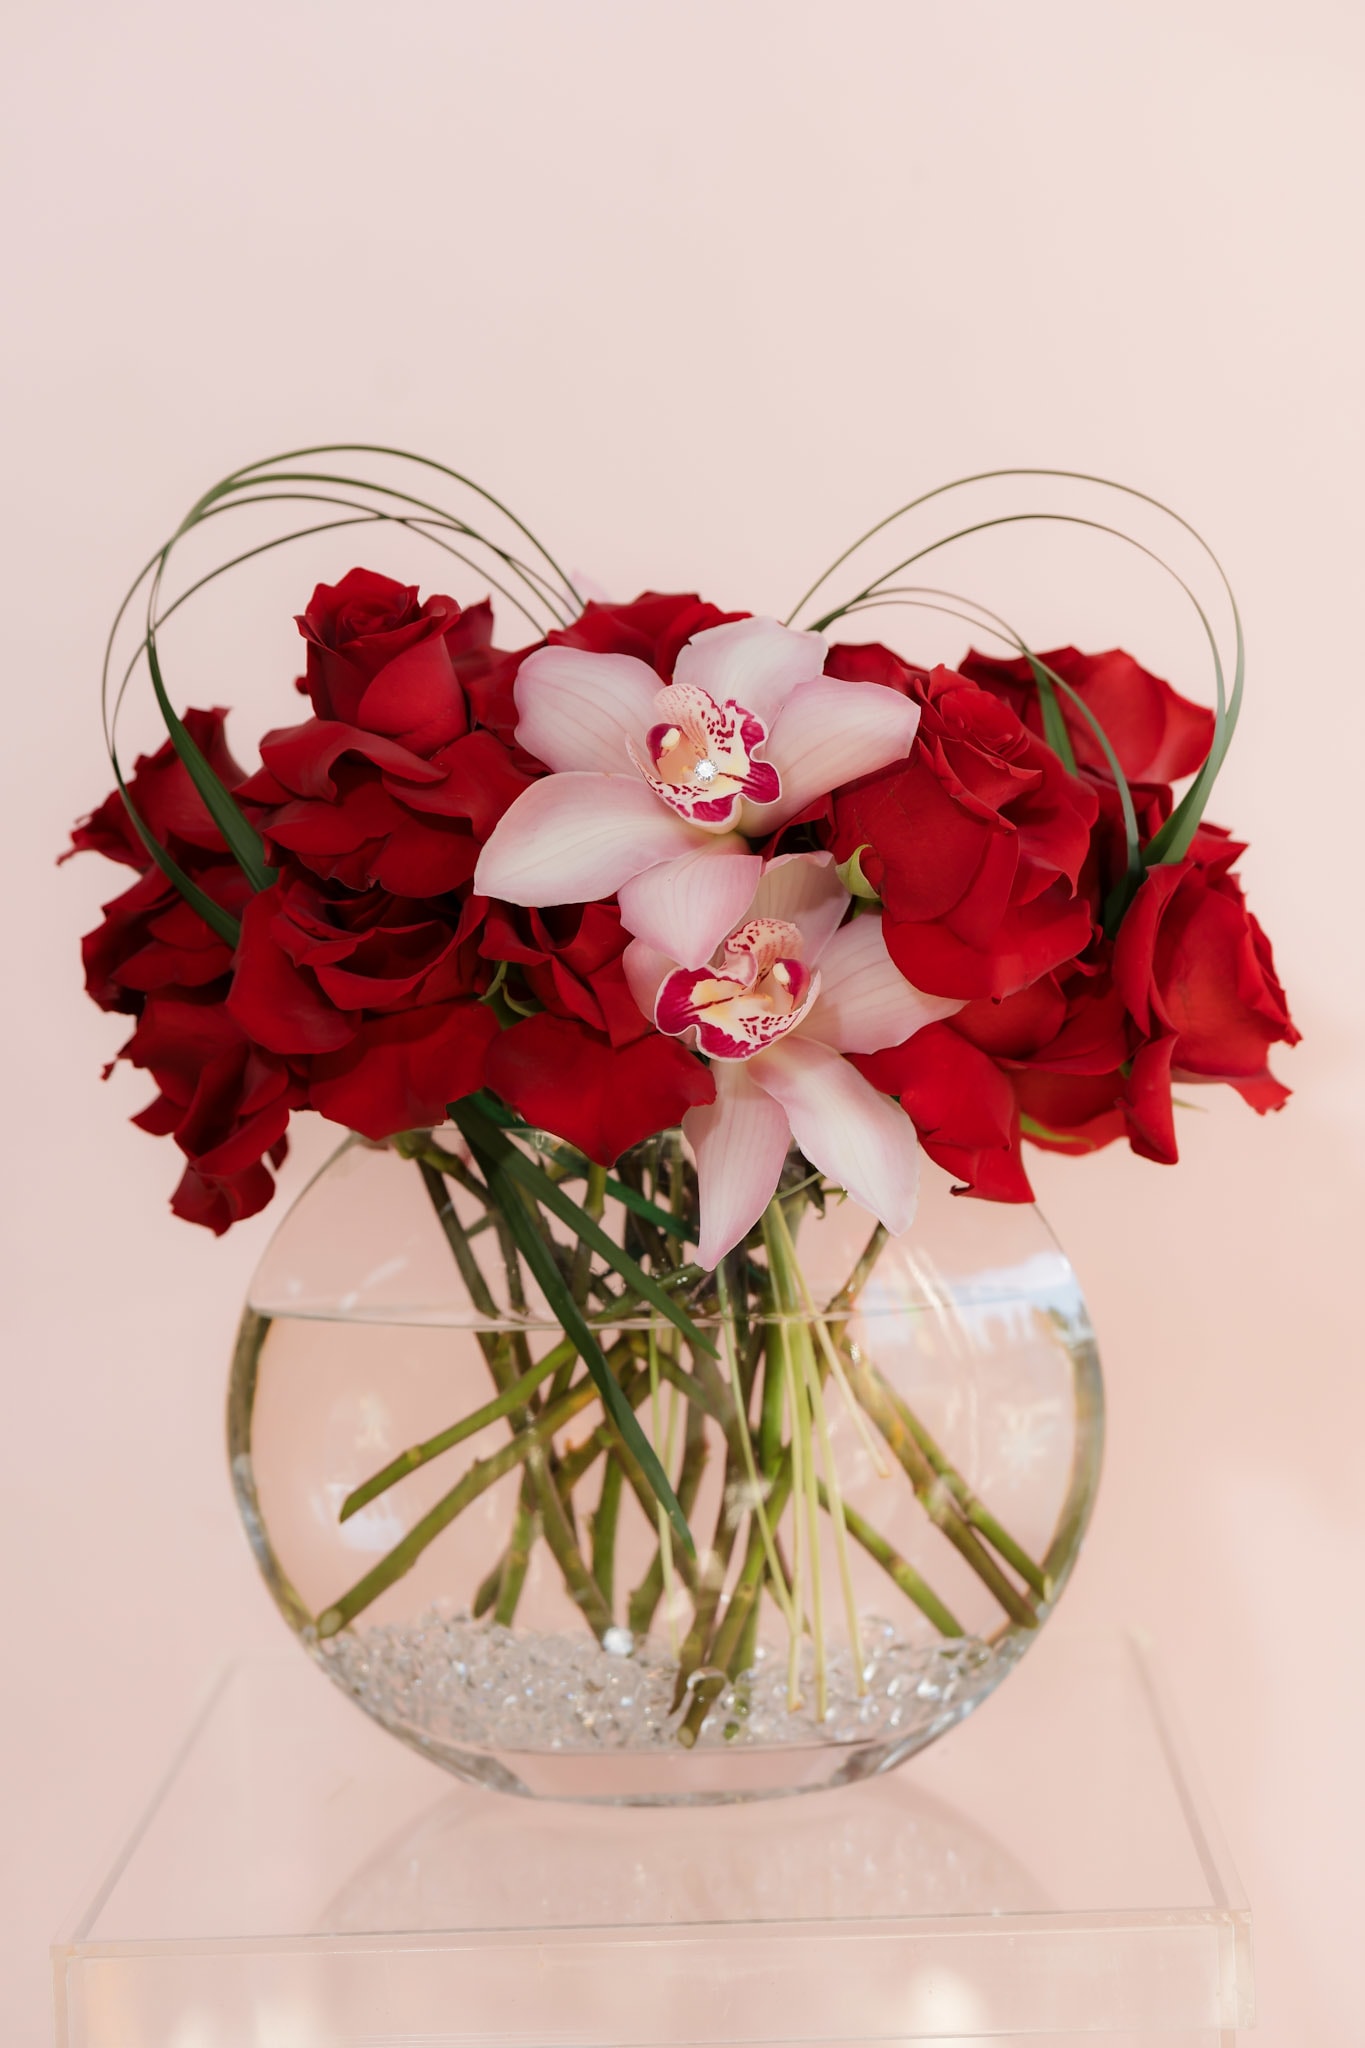 Valentines Day 1 - Roses and Orchids Heart  - Simple and elegant, roses and orchids